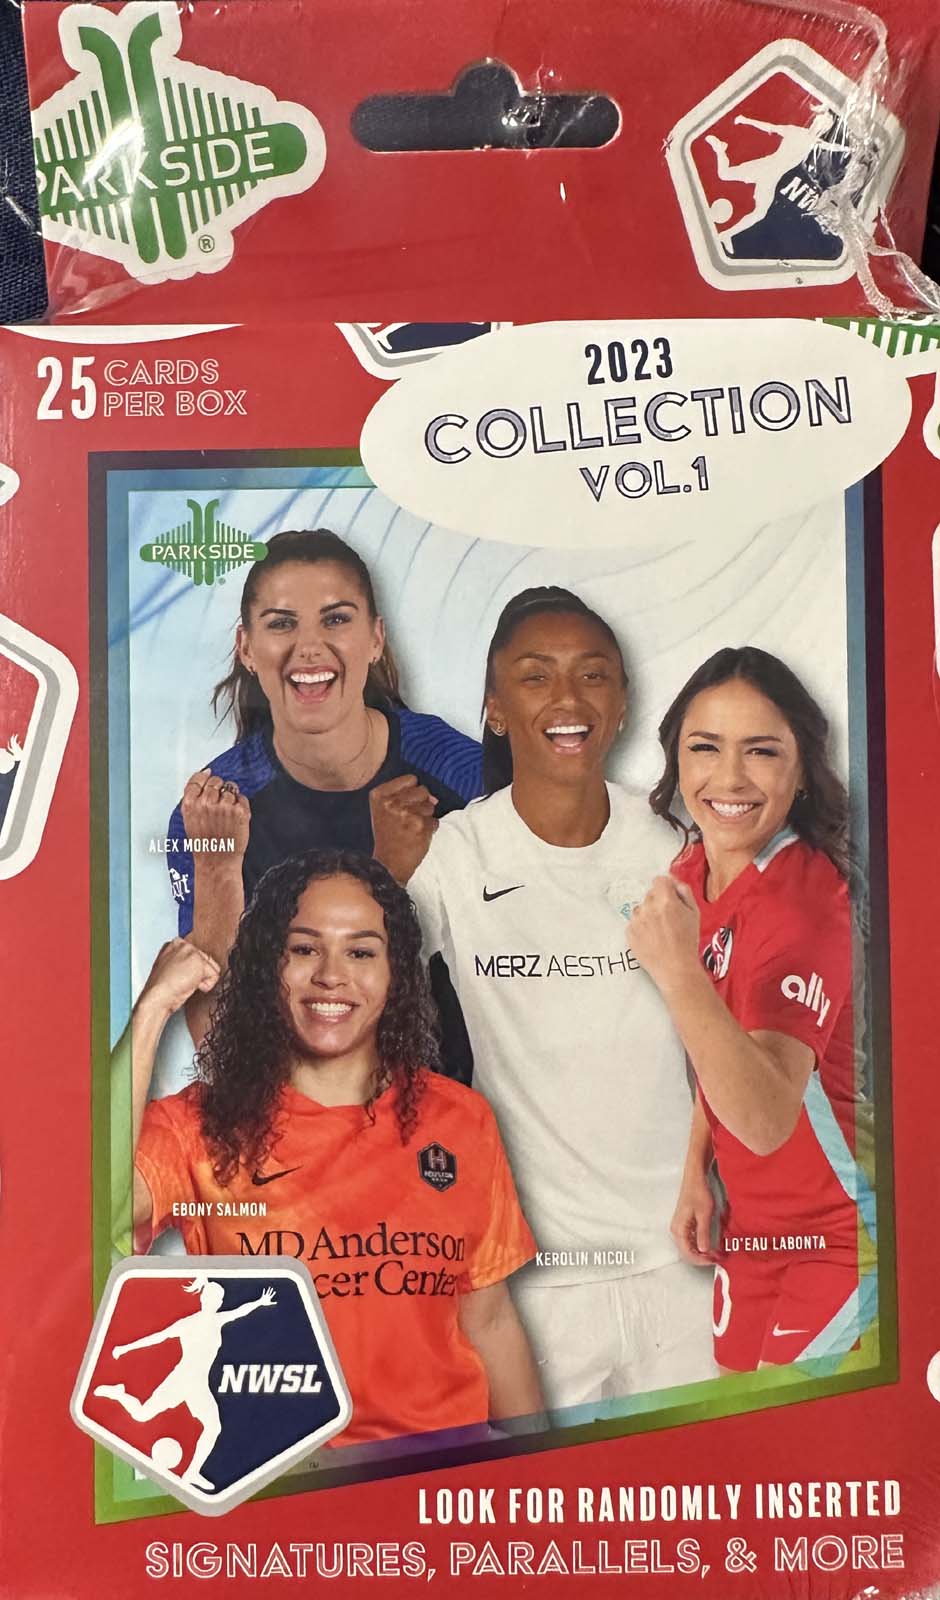 Parkside NWSL 2023 Collections Vol. 1 Trading Cards Hanger Box